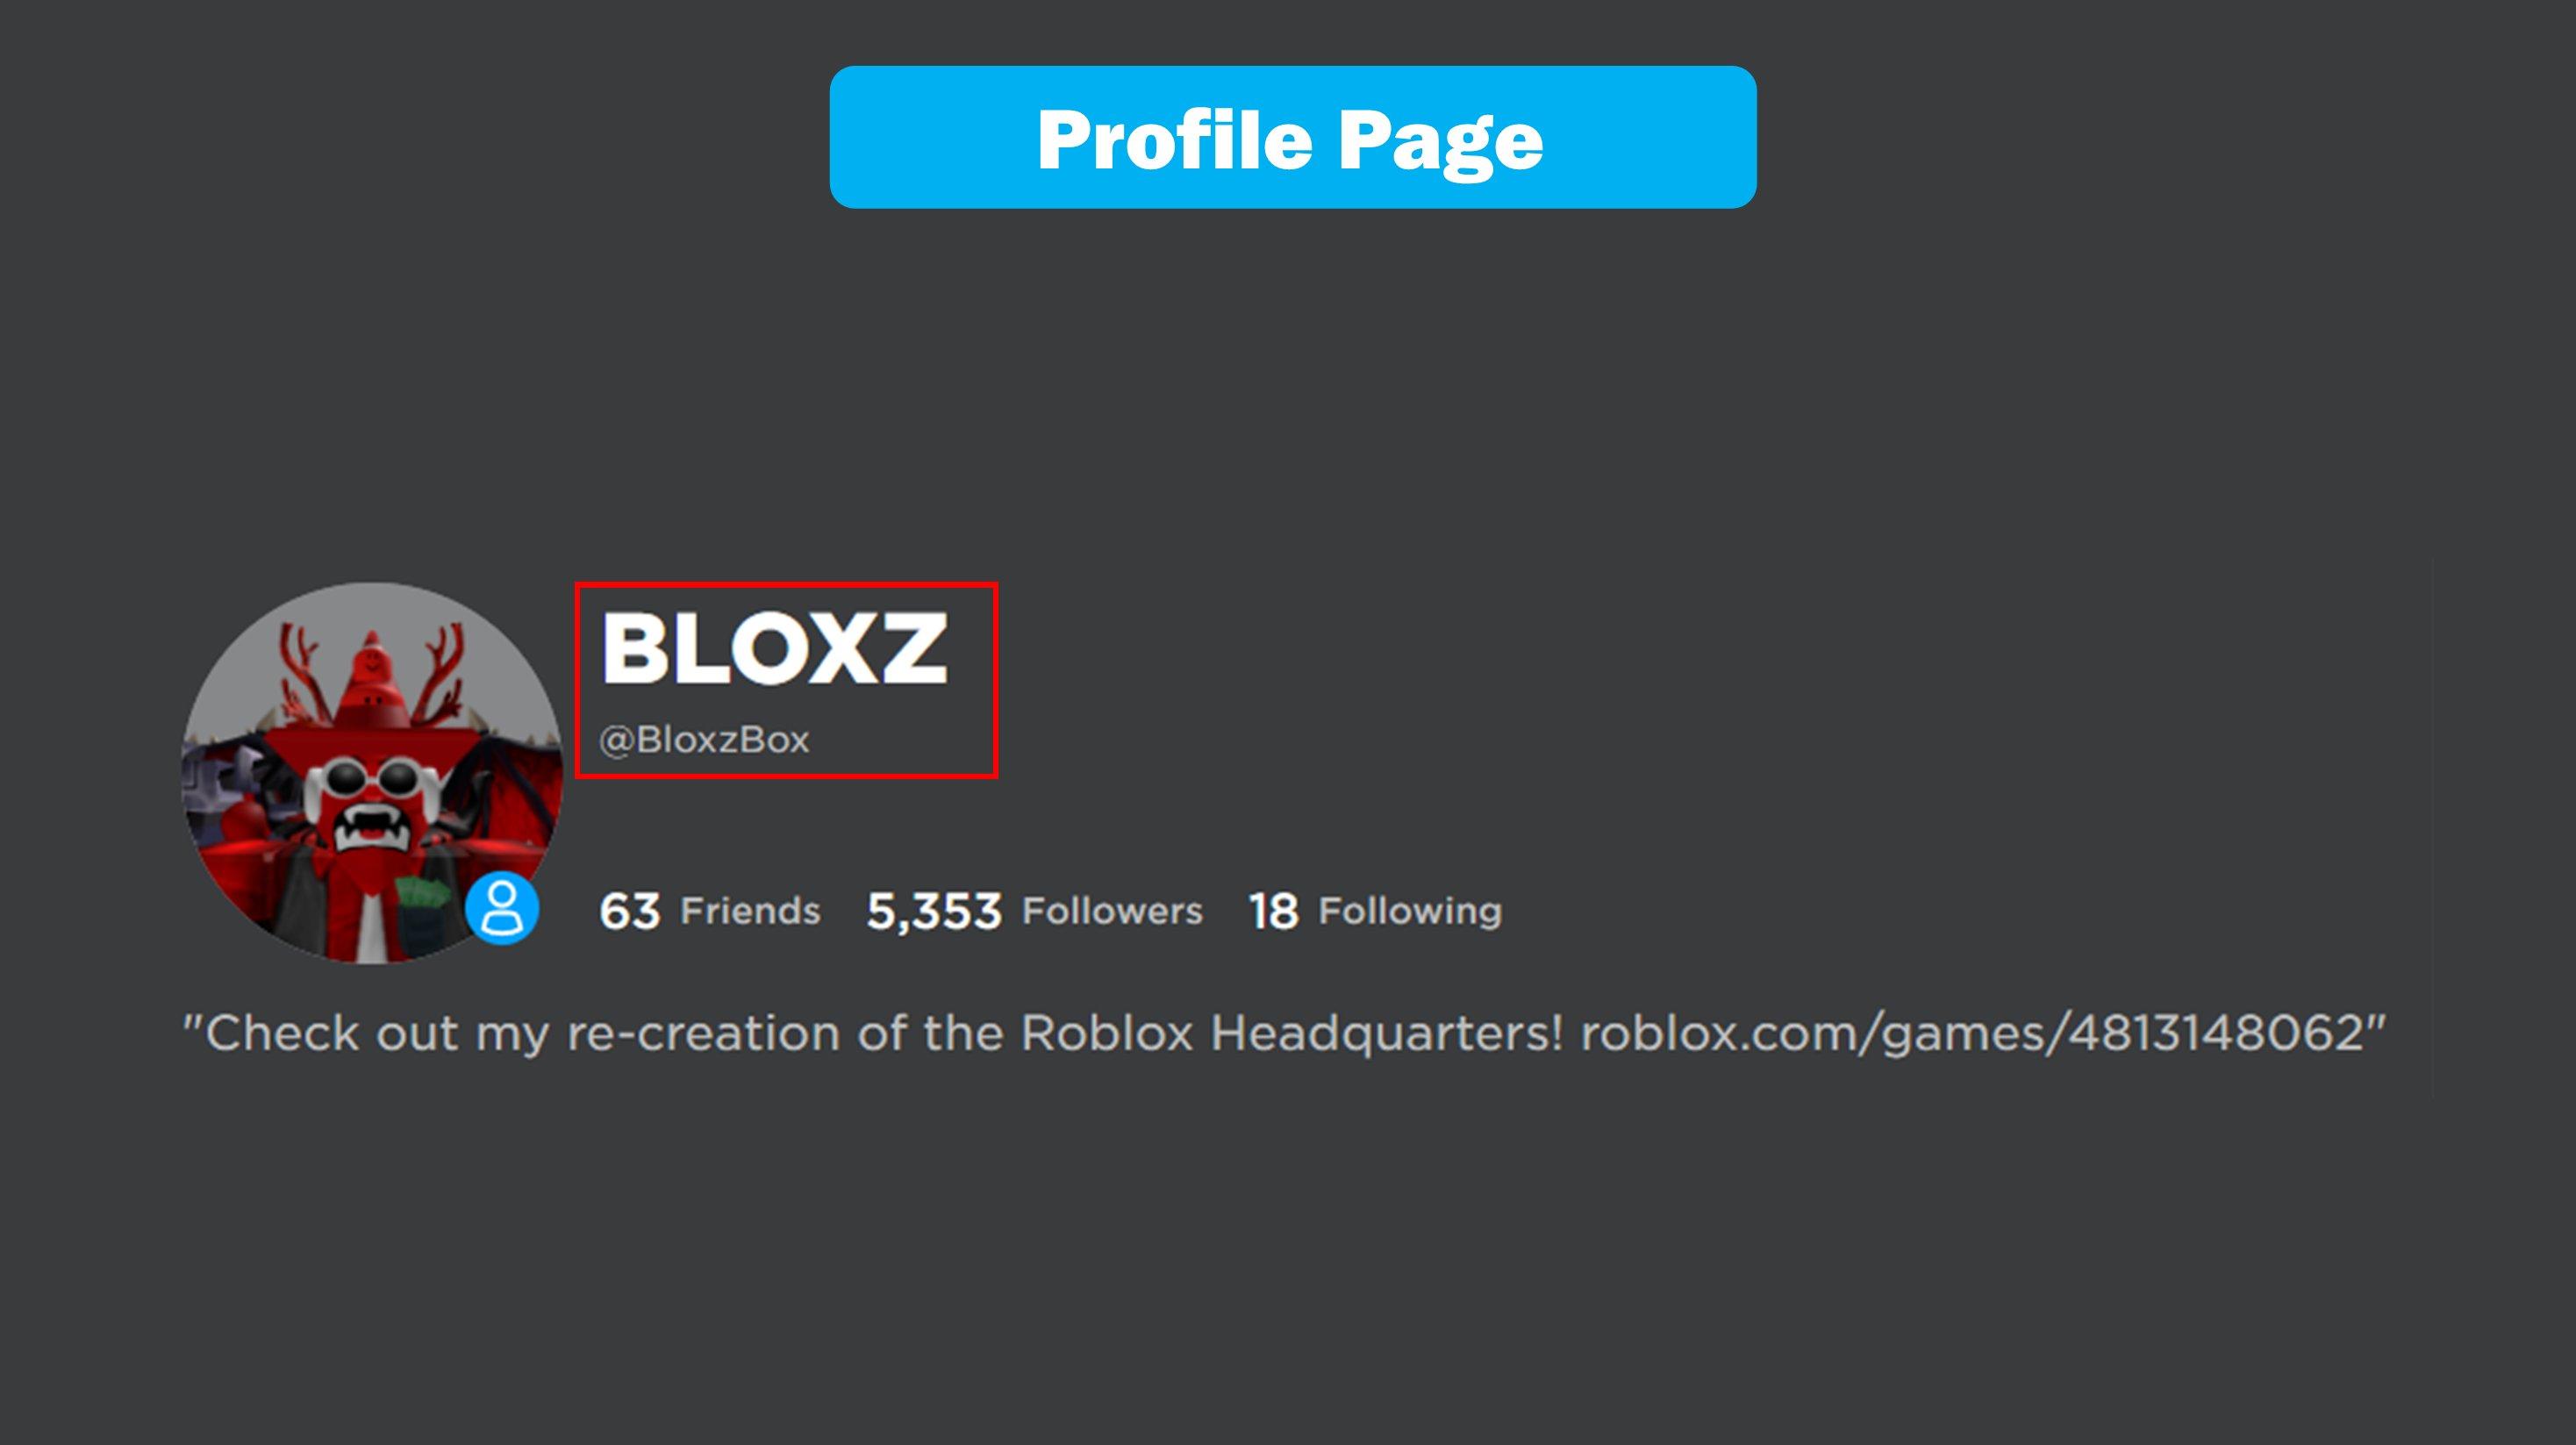 How to get a new display name on Roblox - Quora